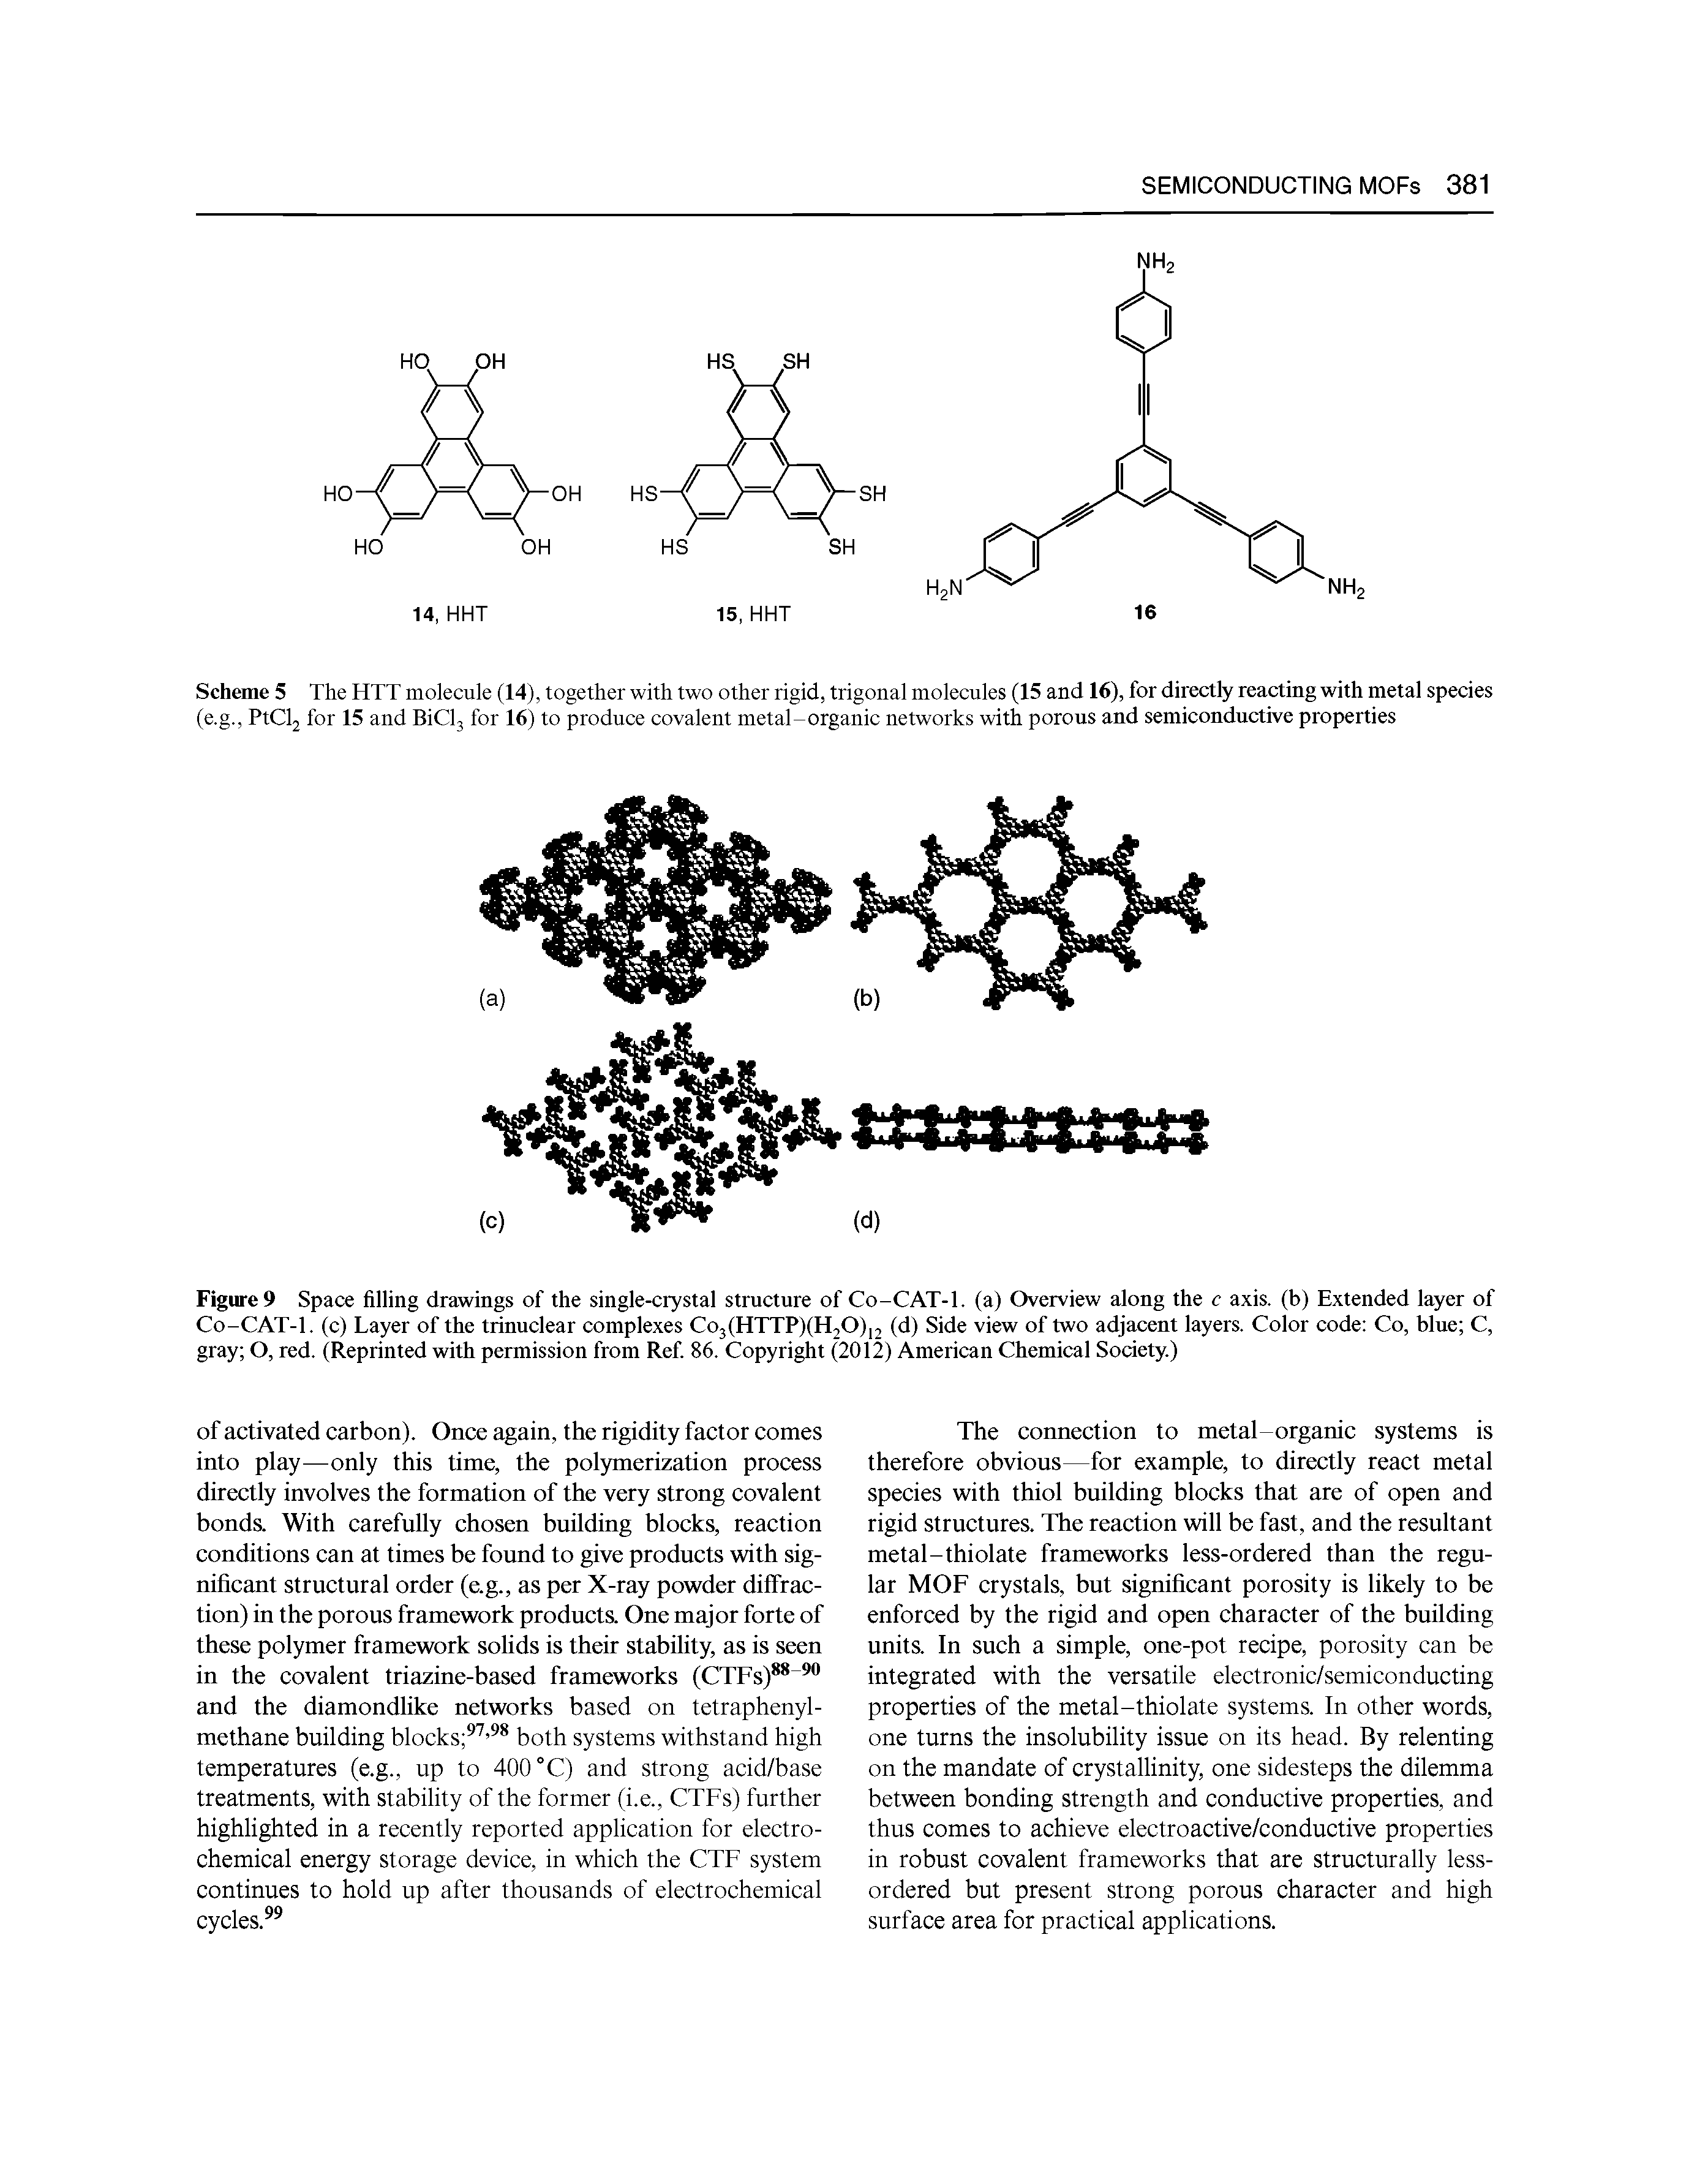 Scheme 5 The HTT molecule (14), together with two other rigid, trigonal molecules (15 and 16), for directly reacting with metal species (e.g., PtClj for 15 and BiClj for 16) to produce covalent metal-organic networks with porous and semiconductive properties...